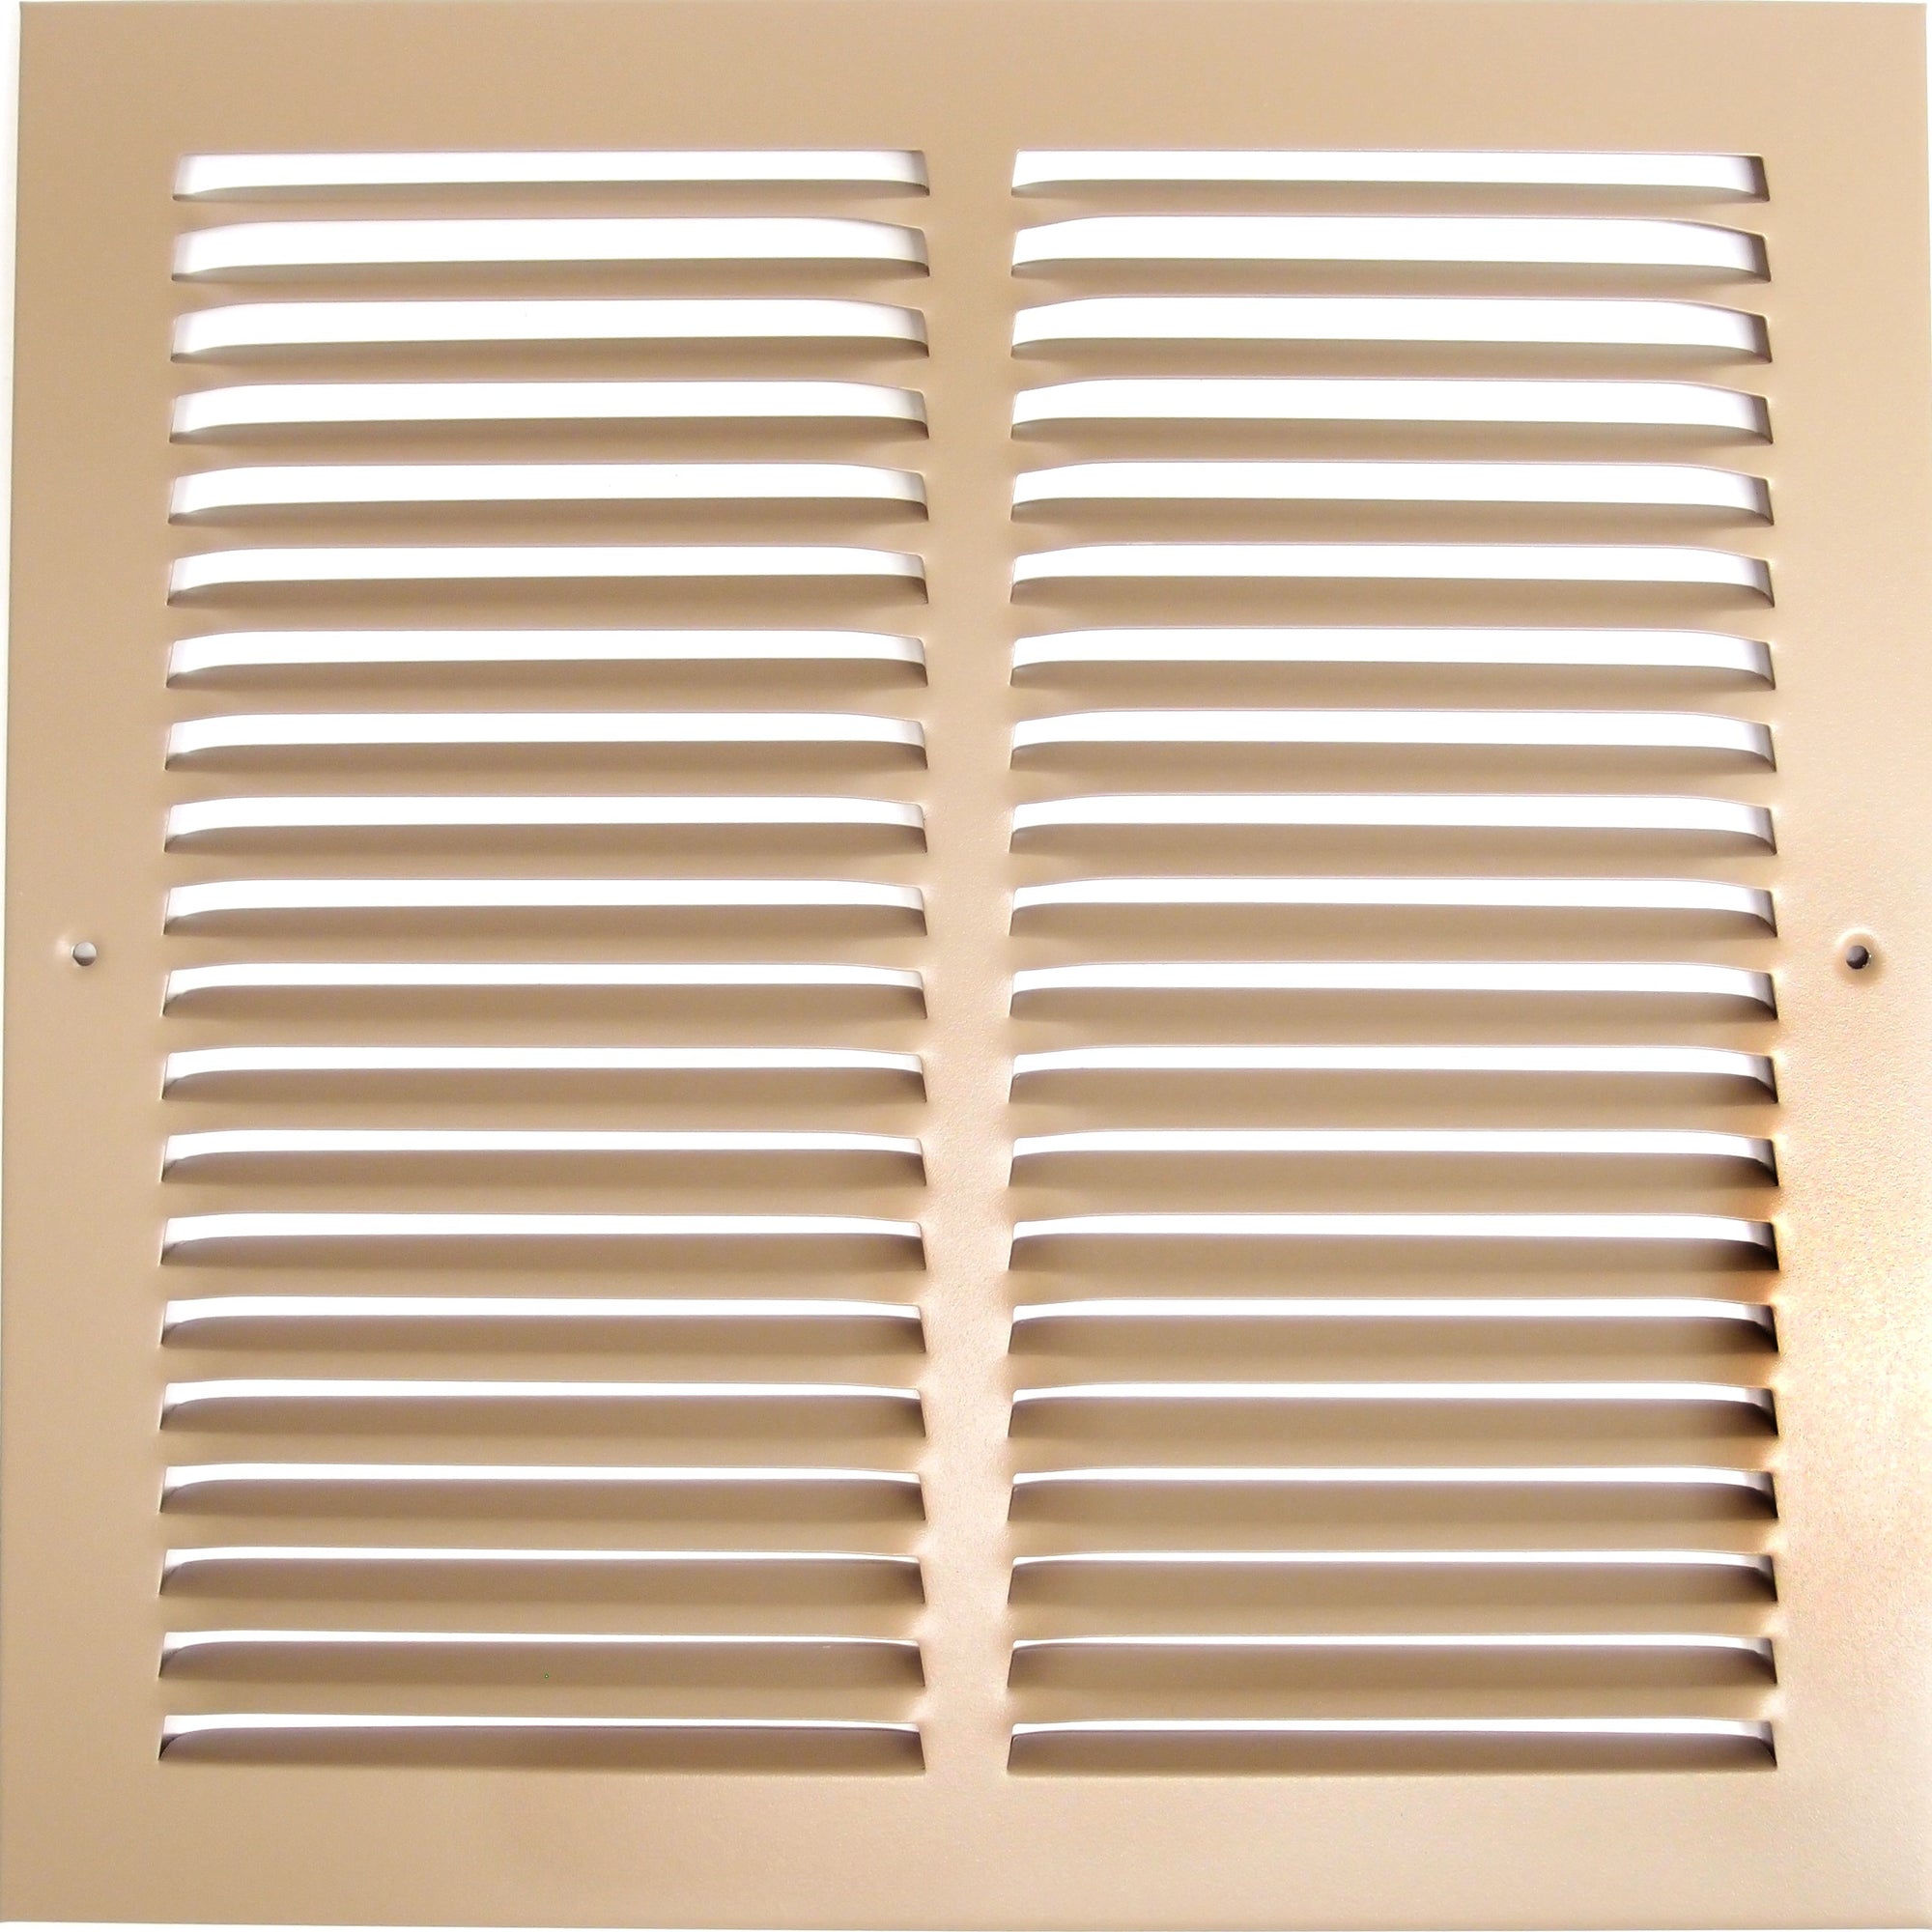 14" X 6" Air Vent Return Grilles - Sidewall and Ceiling - Steel